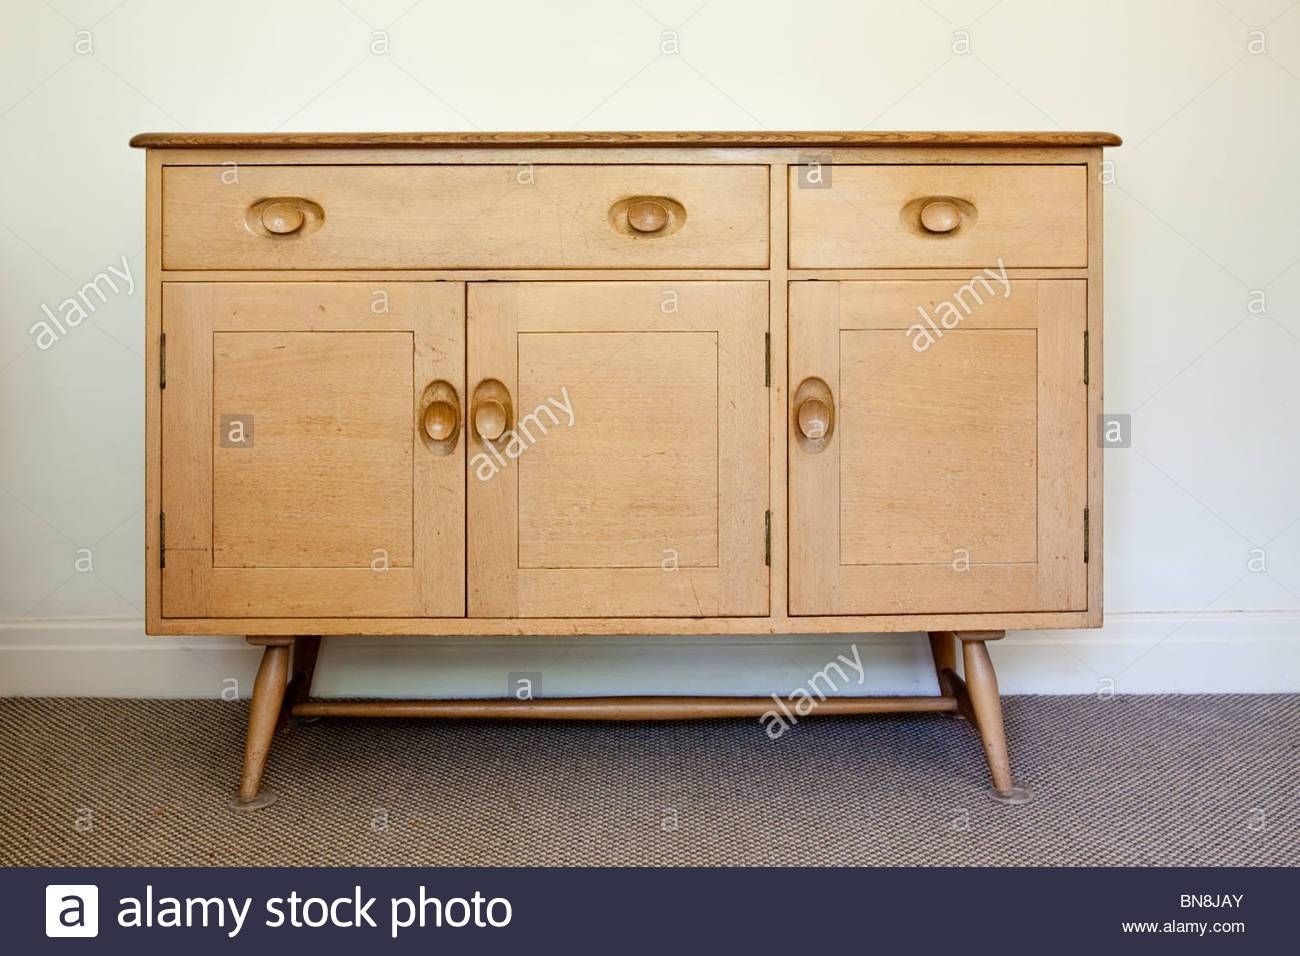 1950s Furniture Stock Photos & 1950s Furniture Stock Images – Alamy Throughout Most Recent 50s Sideboards (Photo 9 of 15)